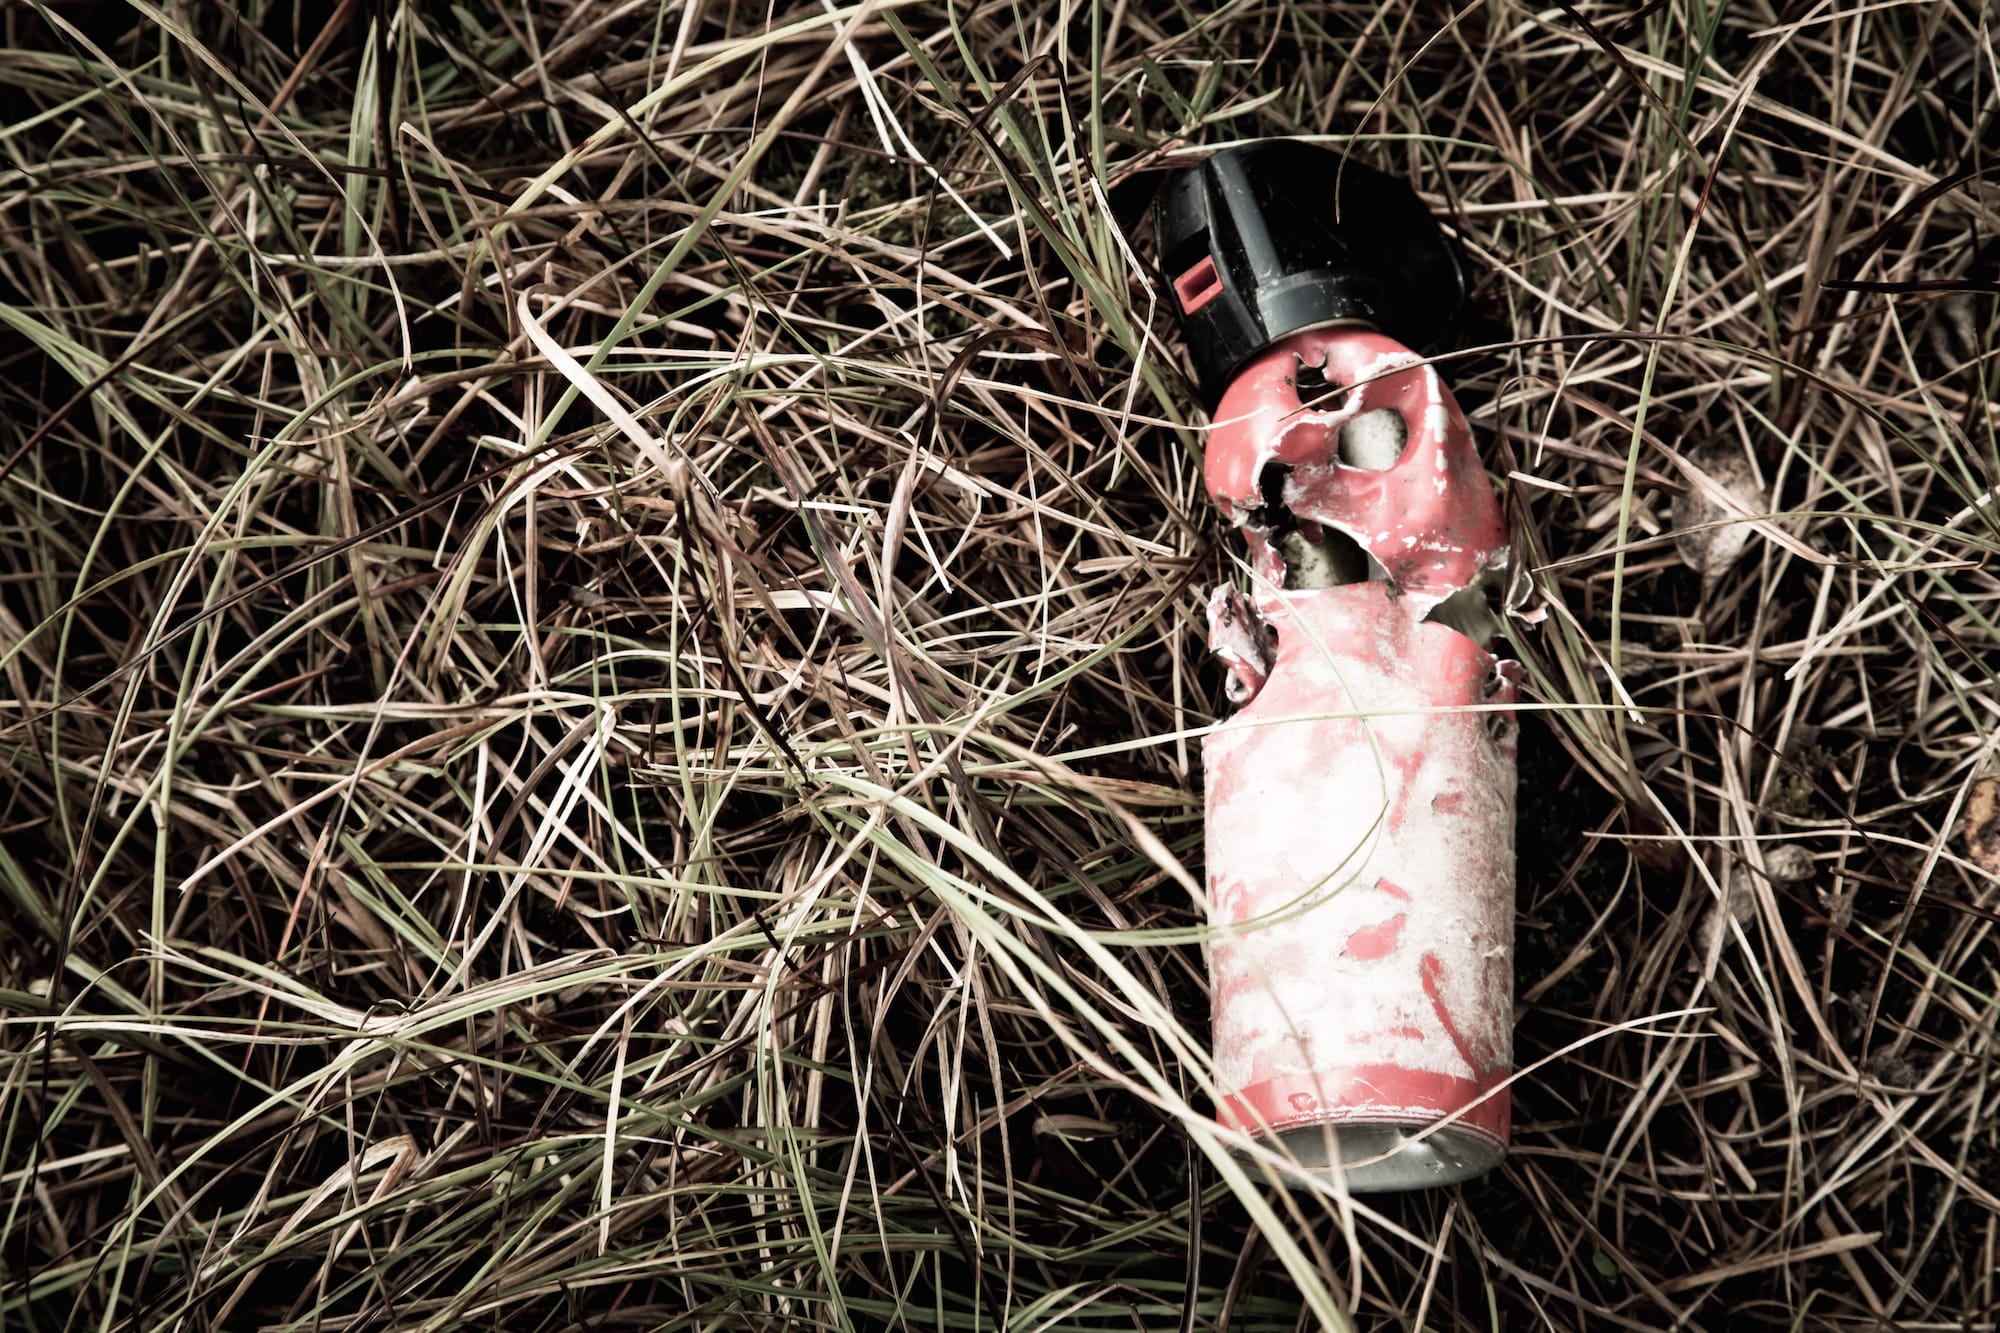 Damaged can of bear spray in the grass